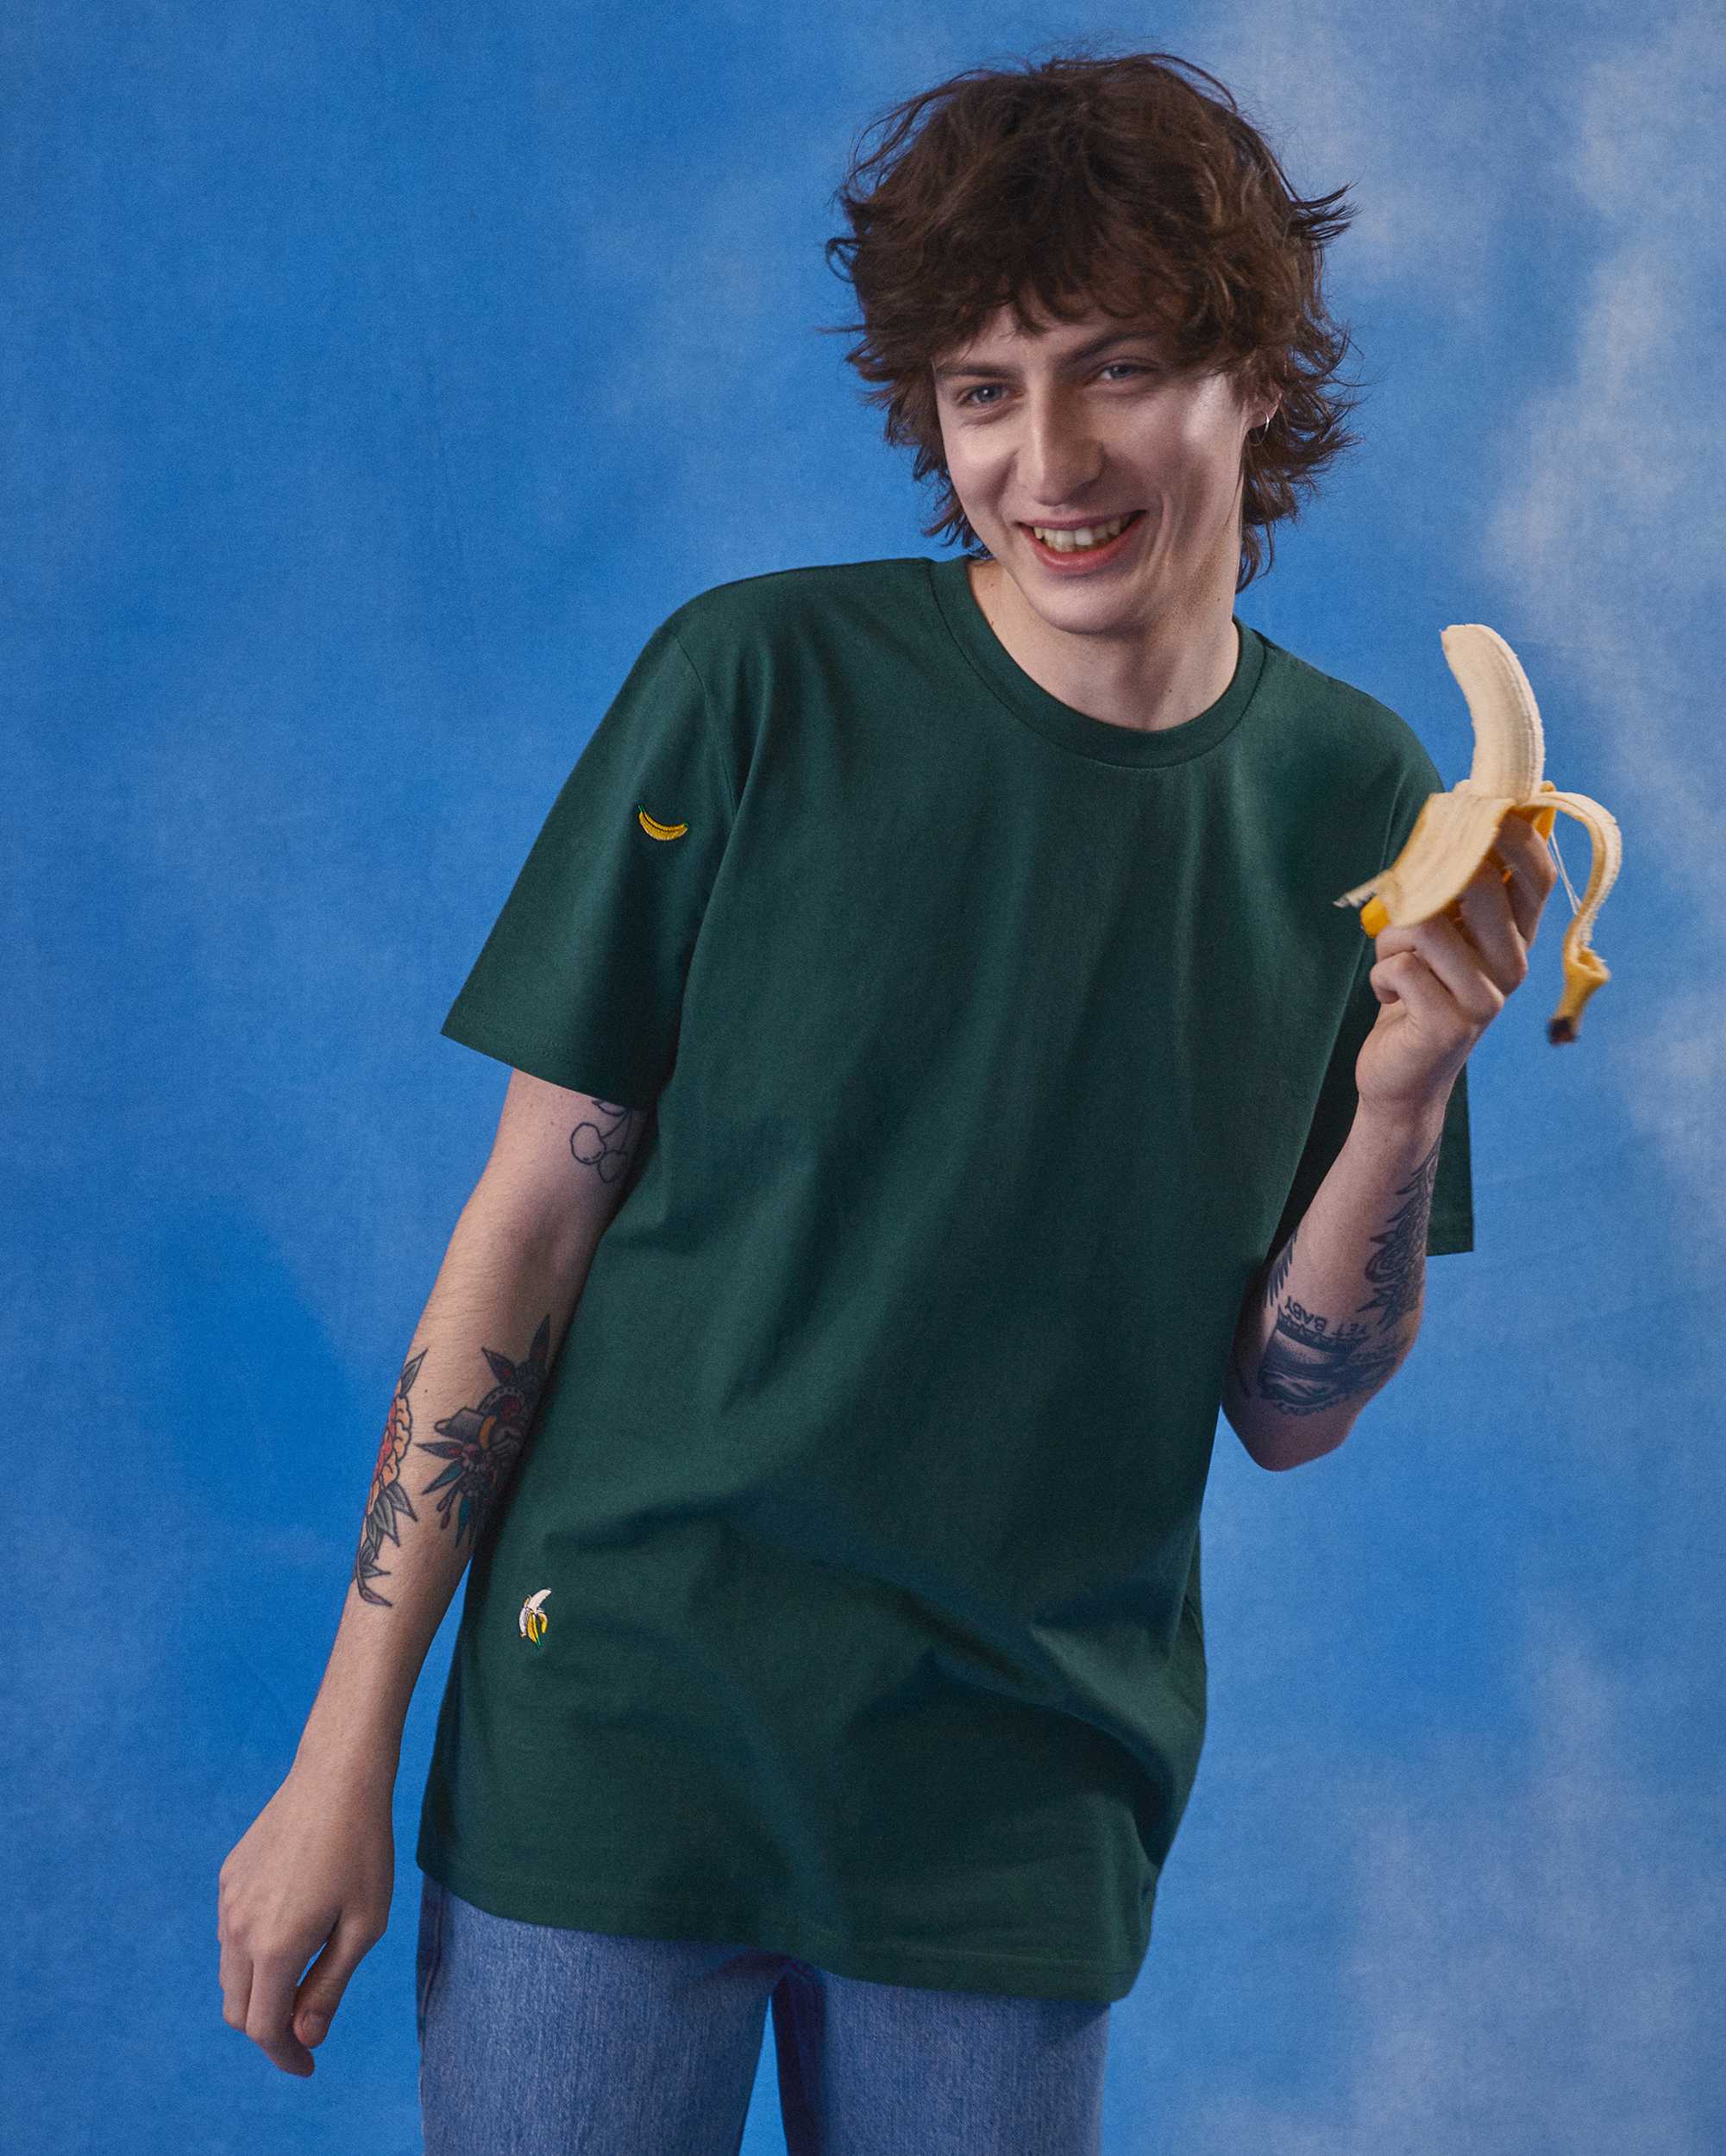 Man standing infront of a blue sky eating a banana in a green t-shirt with banana emroideries on